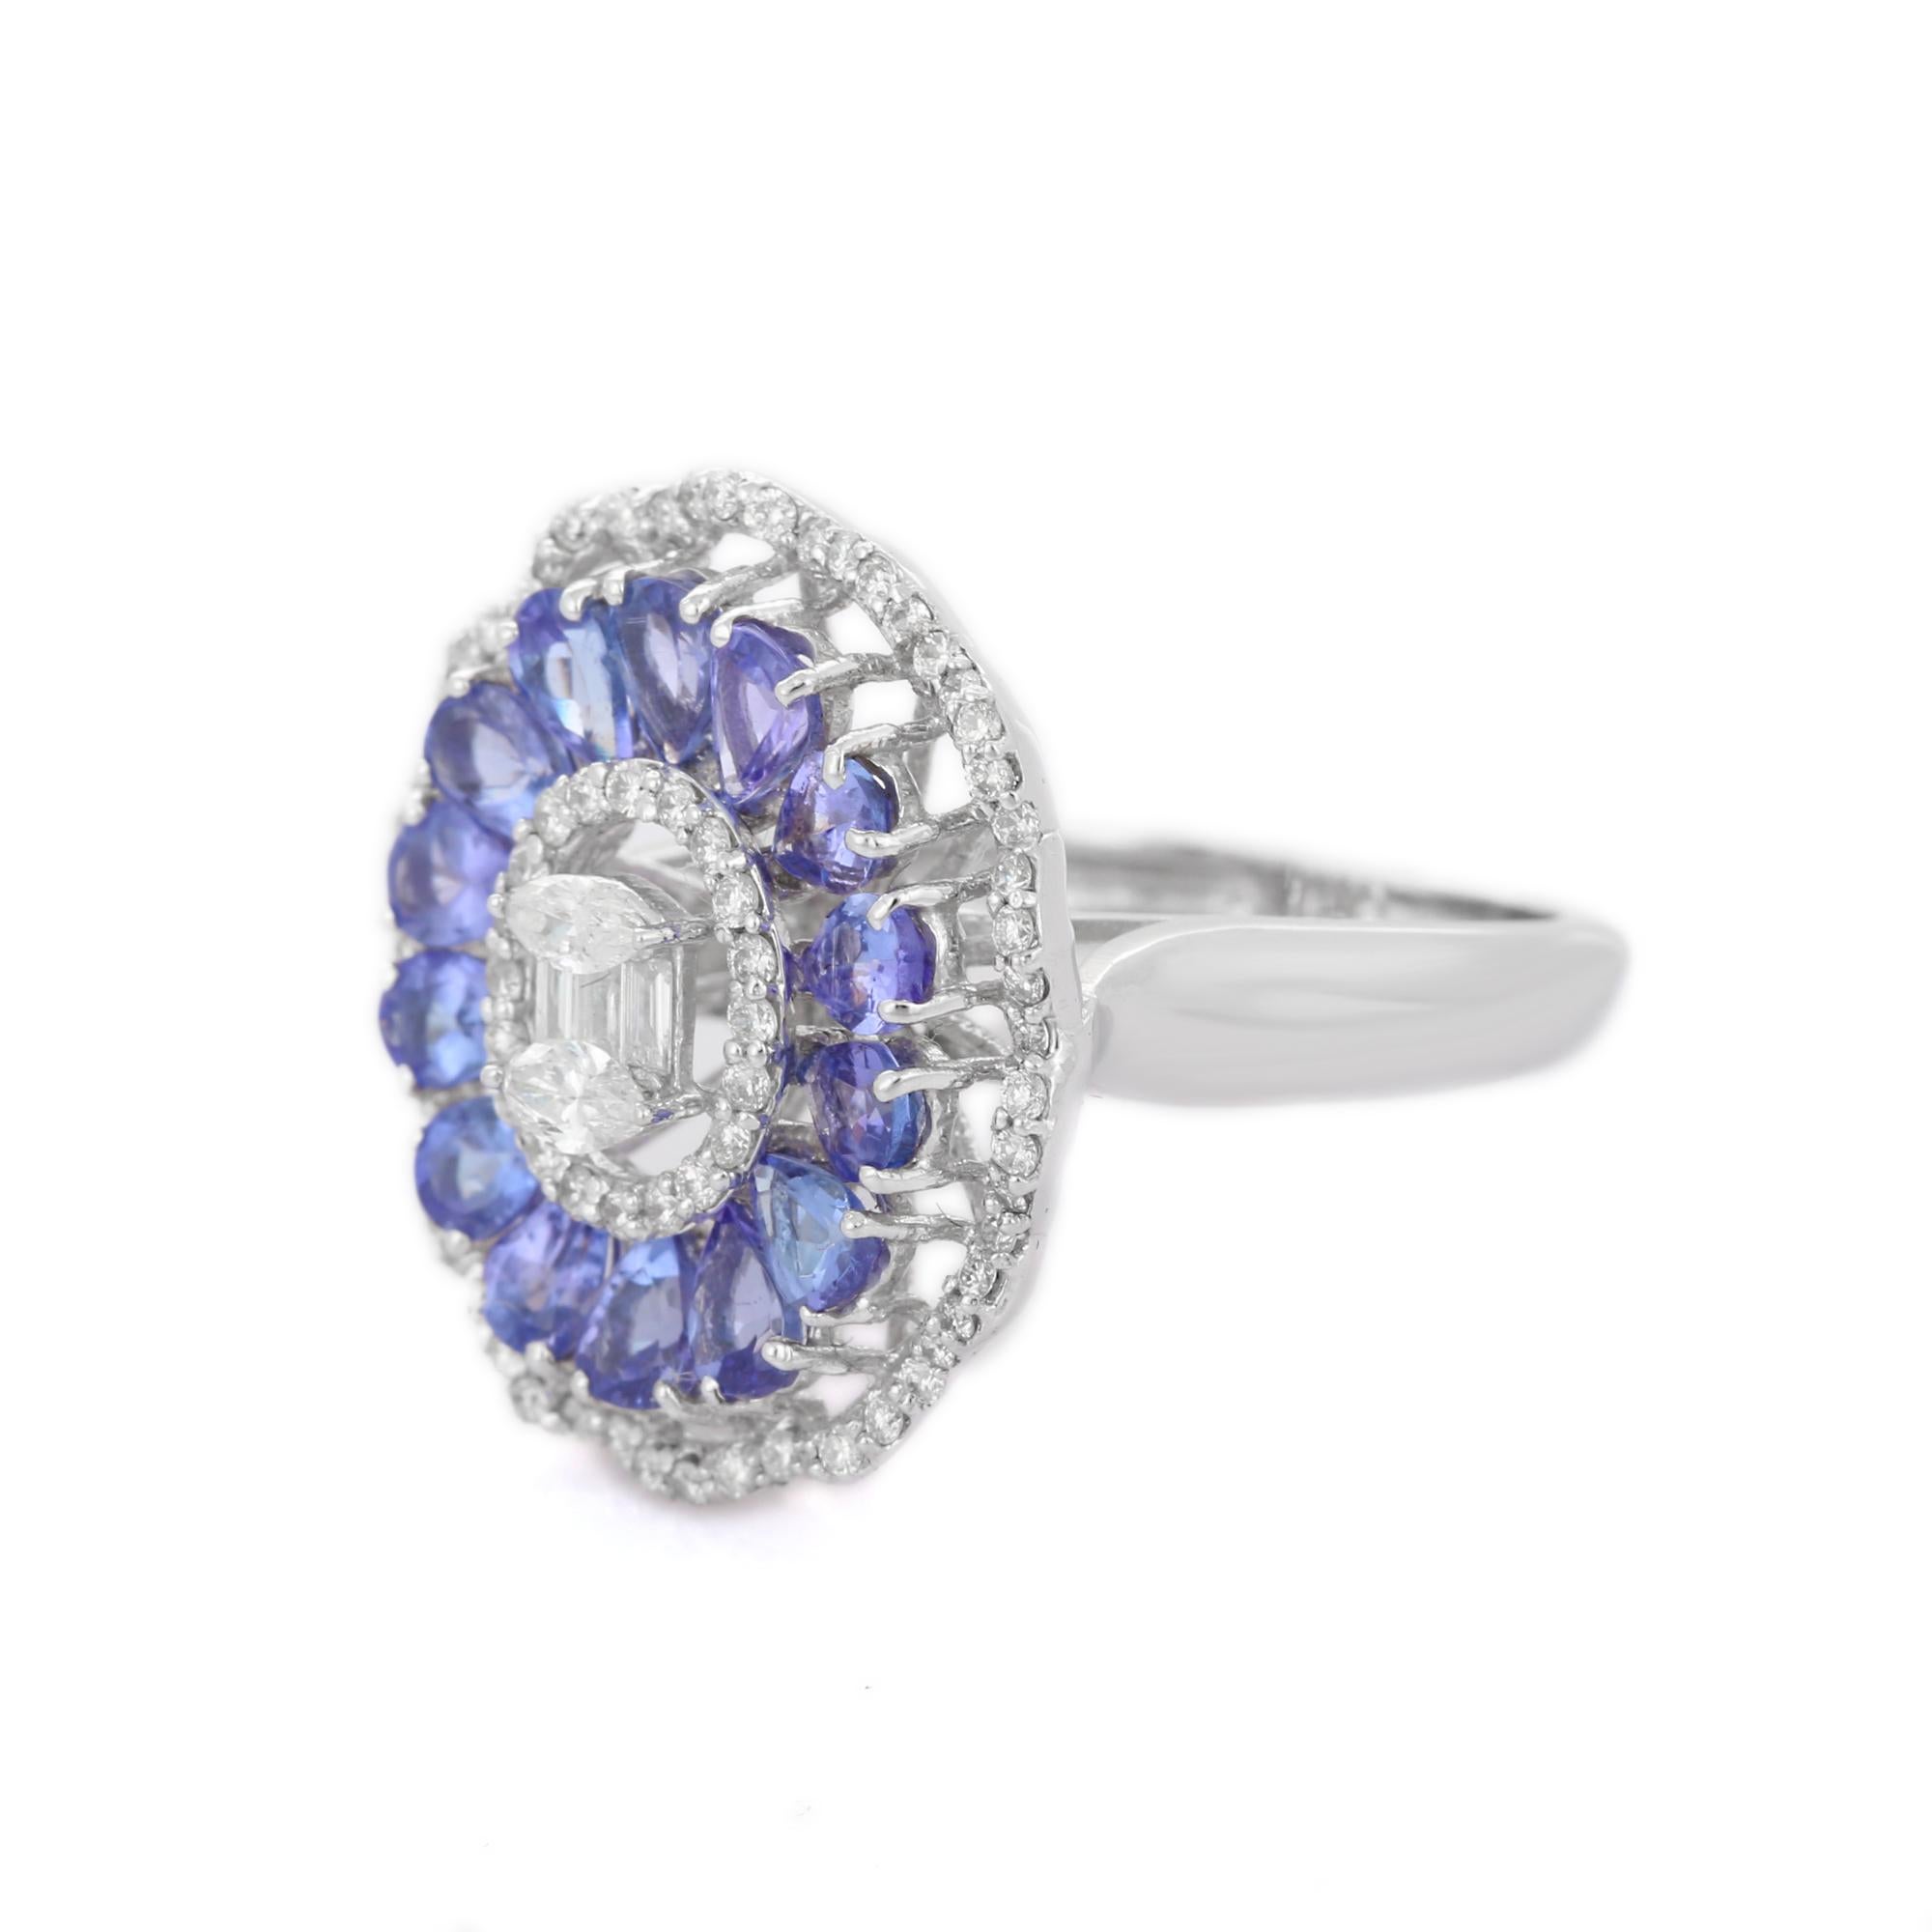 For Sale:  18K White Gold 2.26 ct Blue Sapphire Floral Cocktail Wedding Ring with Diamonds 2